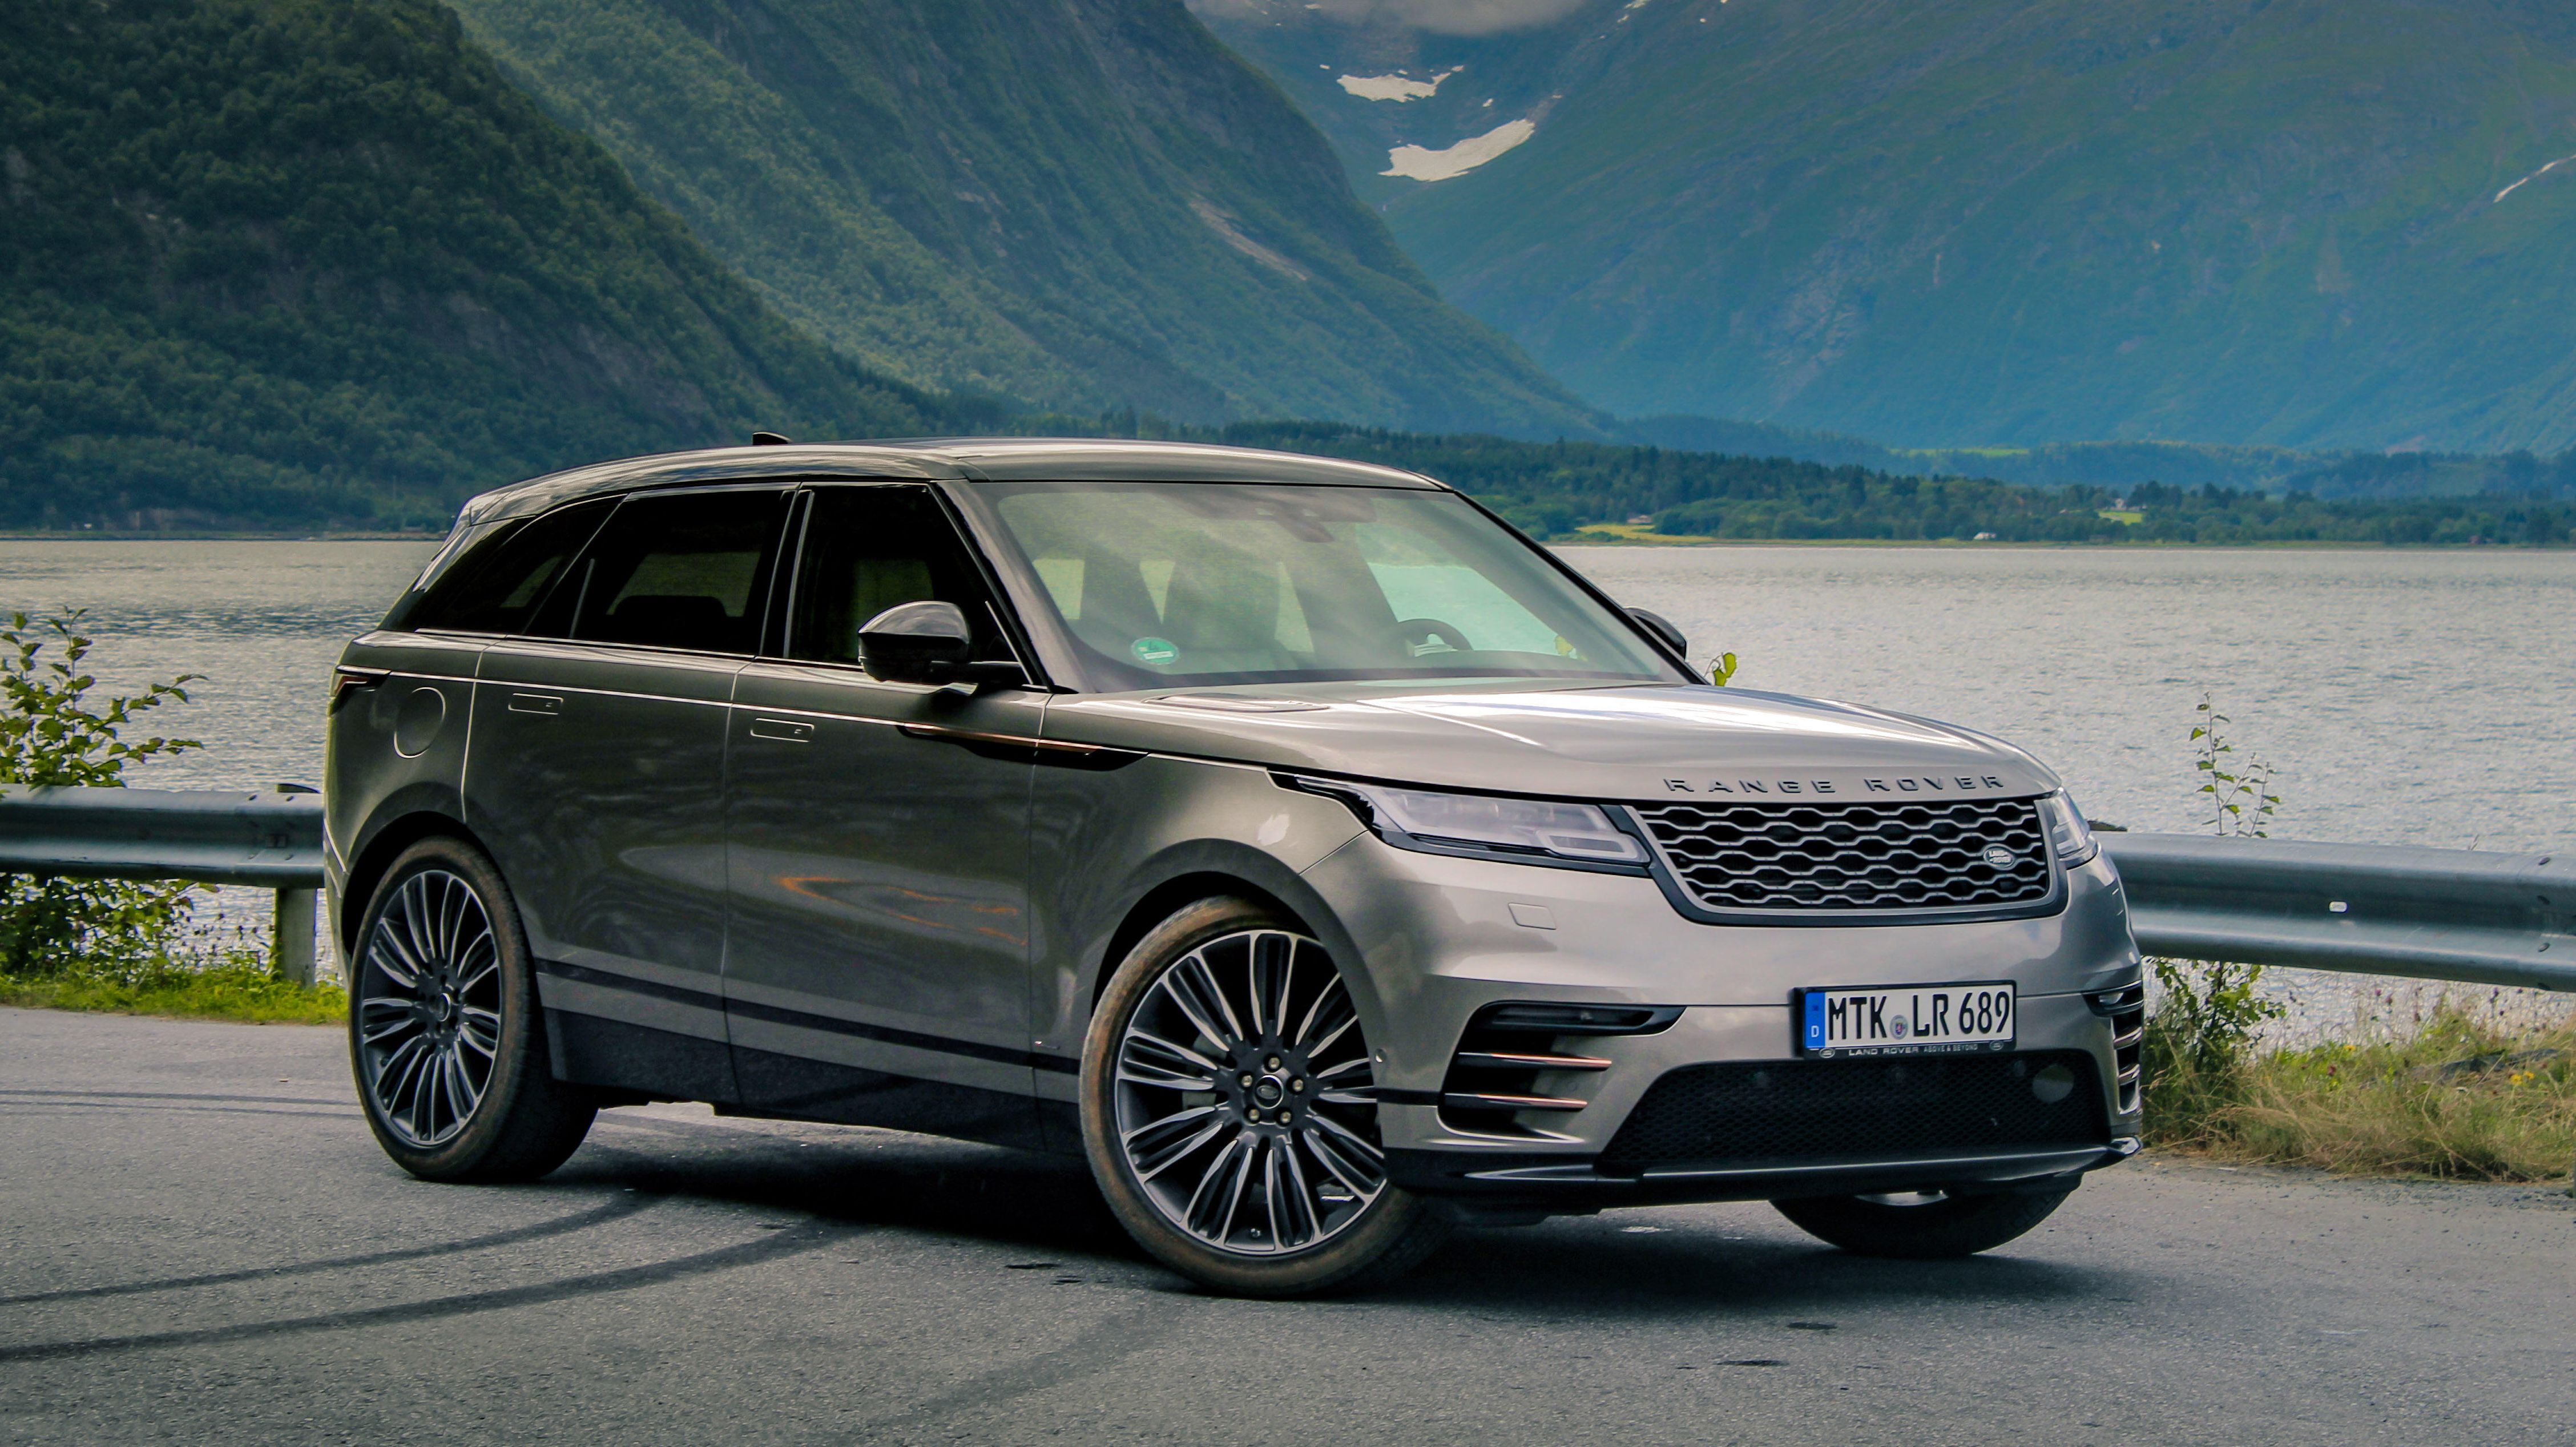 2018 Range Rover Velar review: ratings, specs, photos, price and ...